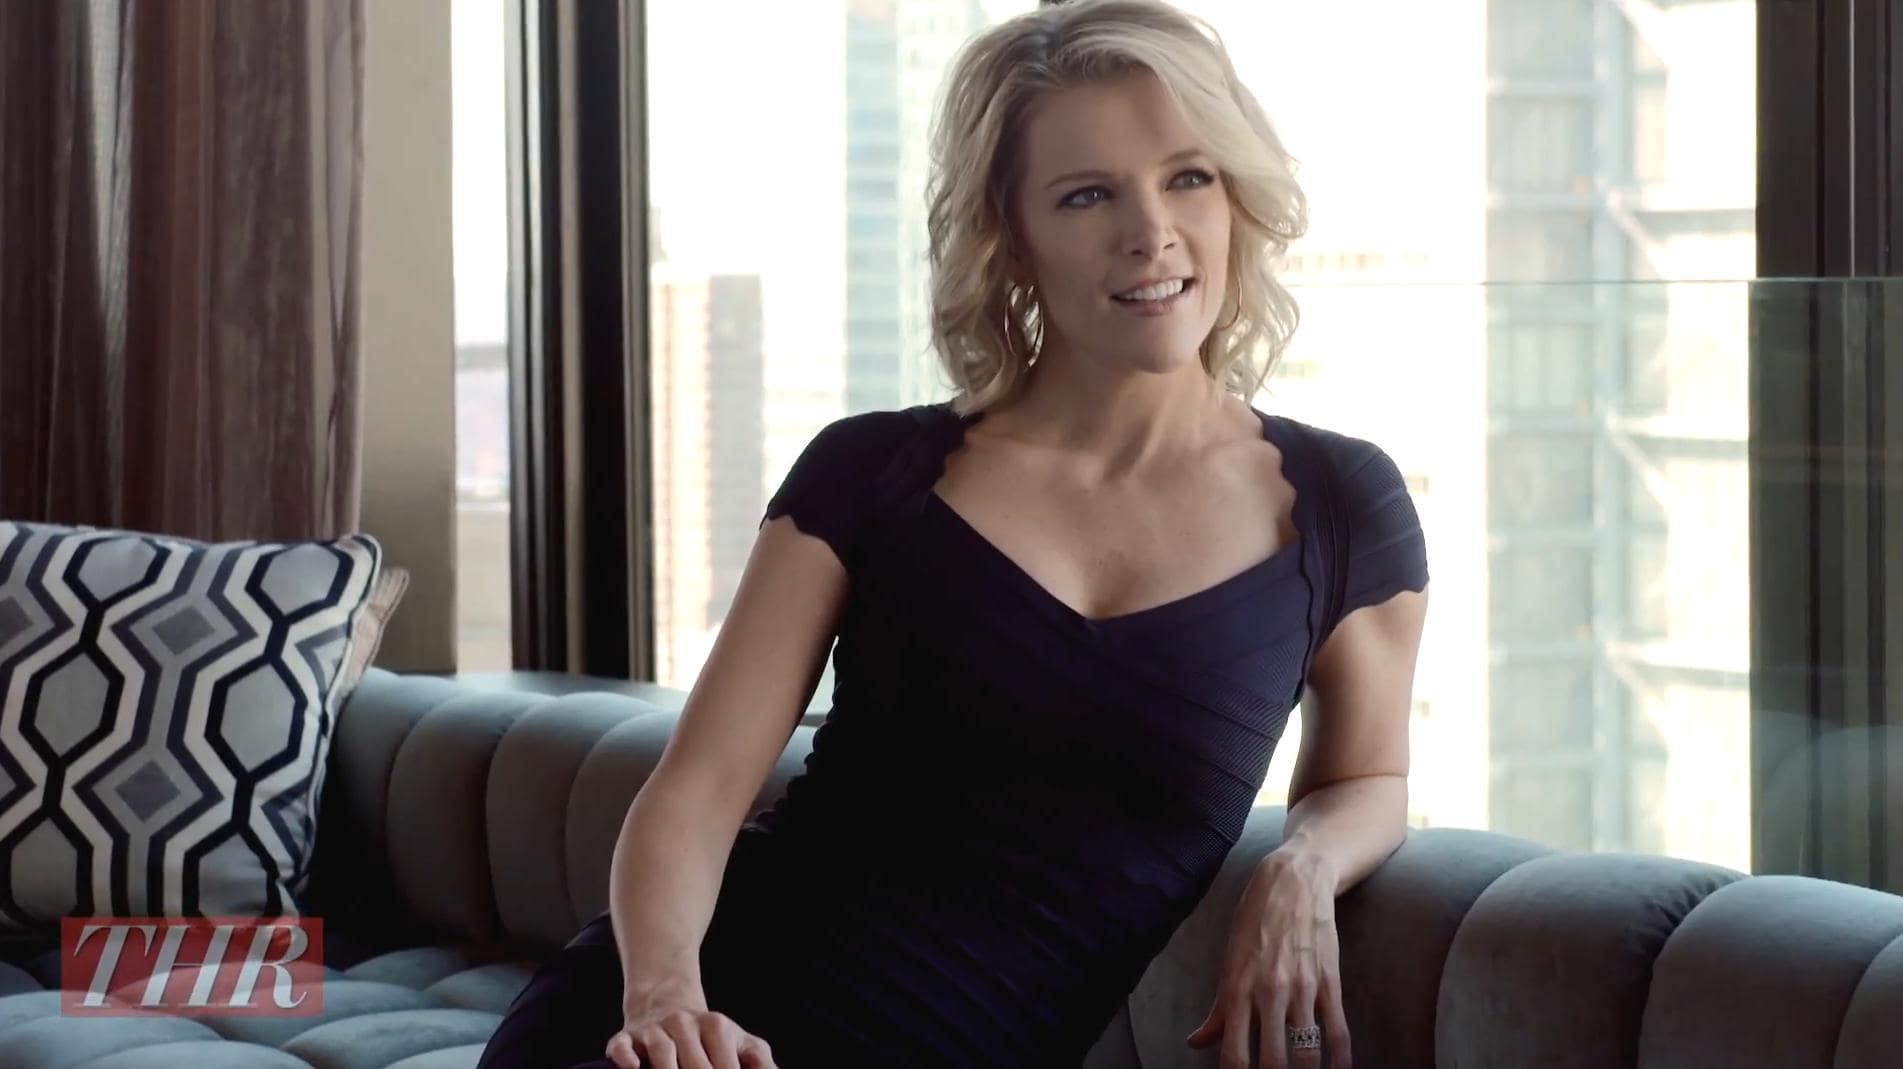 Provocative pictures of megyn kelly